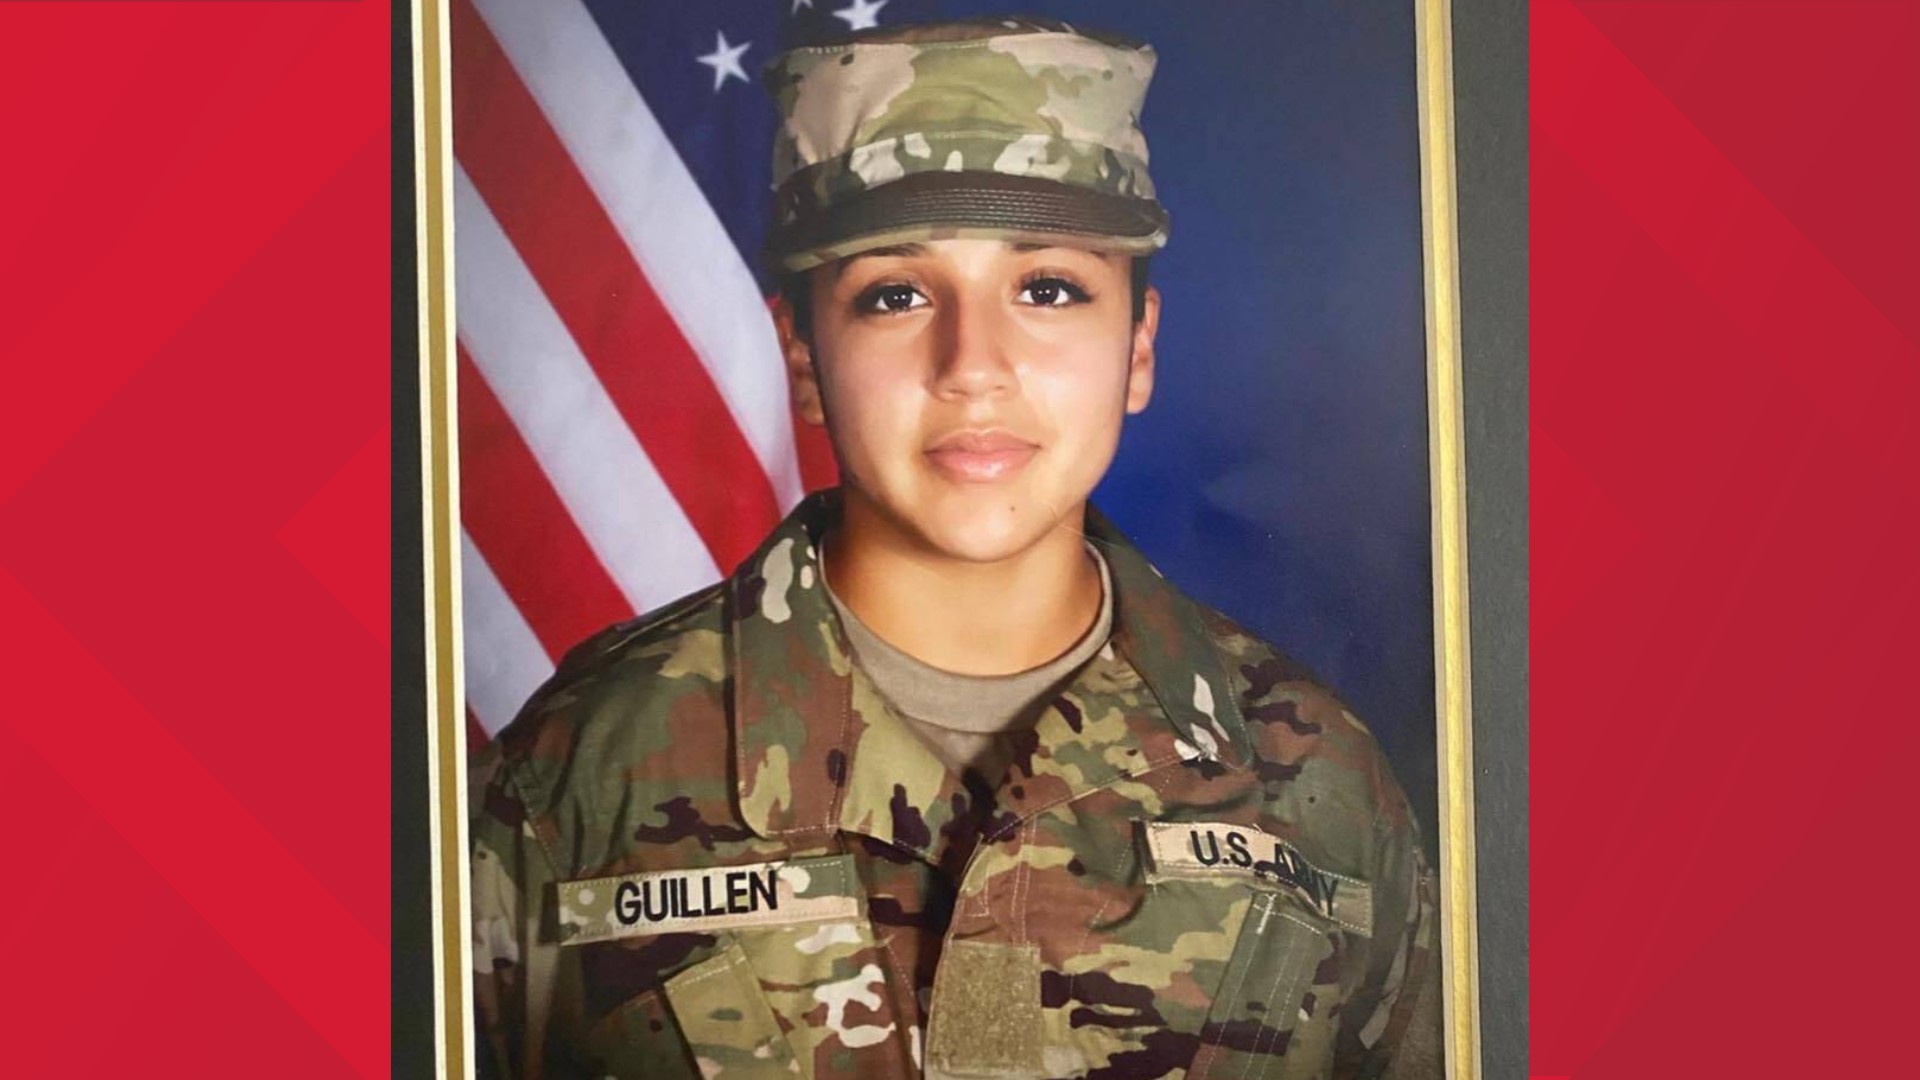 Vanessa Guillen's family attorney, Natalie Khawam, confirmed the remains found near the Leon River June 30 belong to the missing Fort Hood solider.